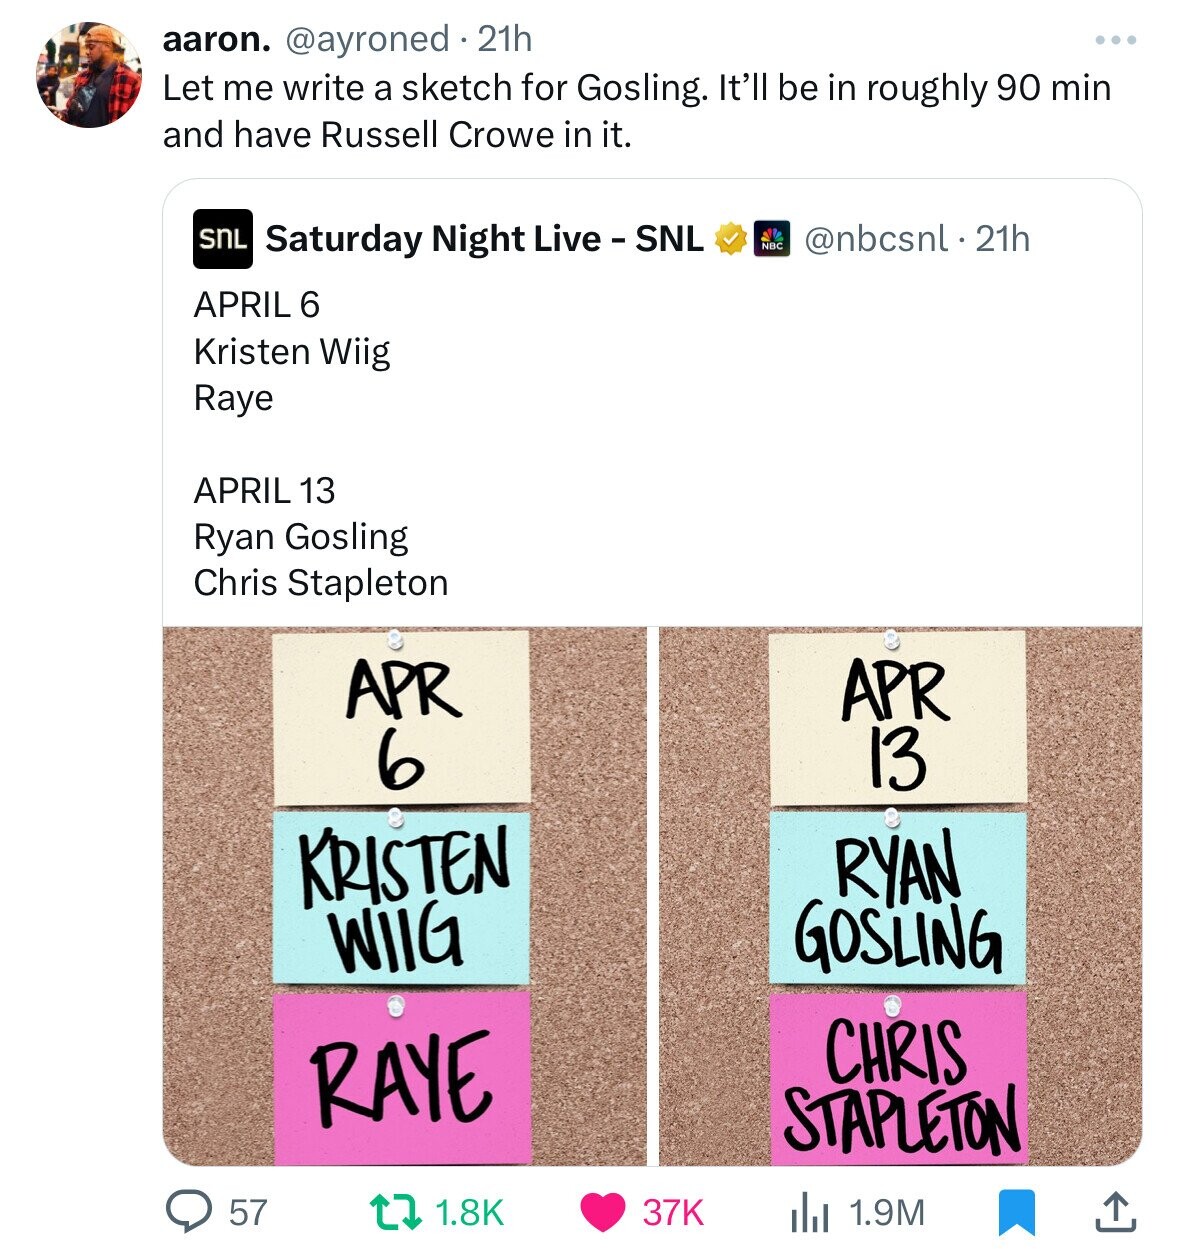 screenshot - aaron. 21h Let me write a sketch for Gosling. It'll be in roughly 90 min and have Russell Crowe in it. Snl Saturday Night Live Snl . 21h April 6 Kristen Wiig Raye April 13 Ryan Gosling Chris Stapleton Nbc Apr 6 Apr 13 Kristen WilG Ryan Goslin